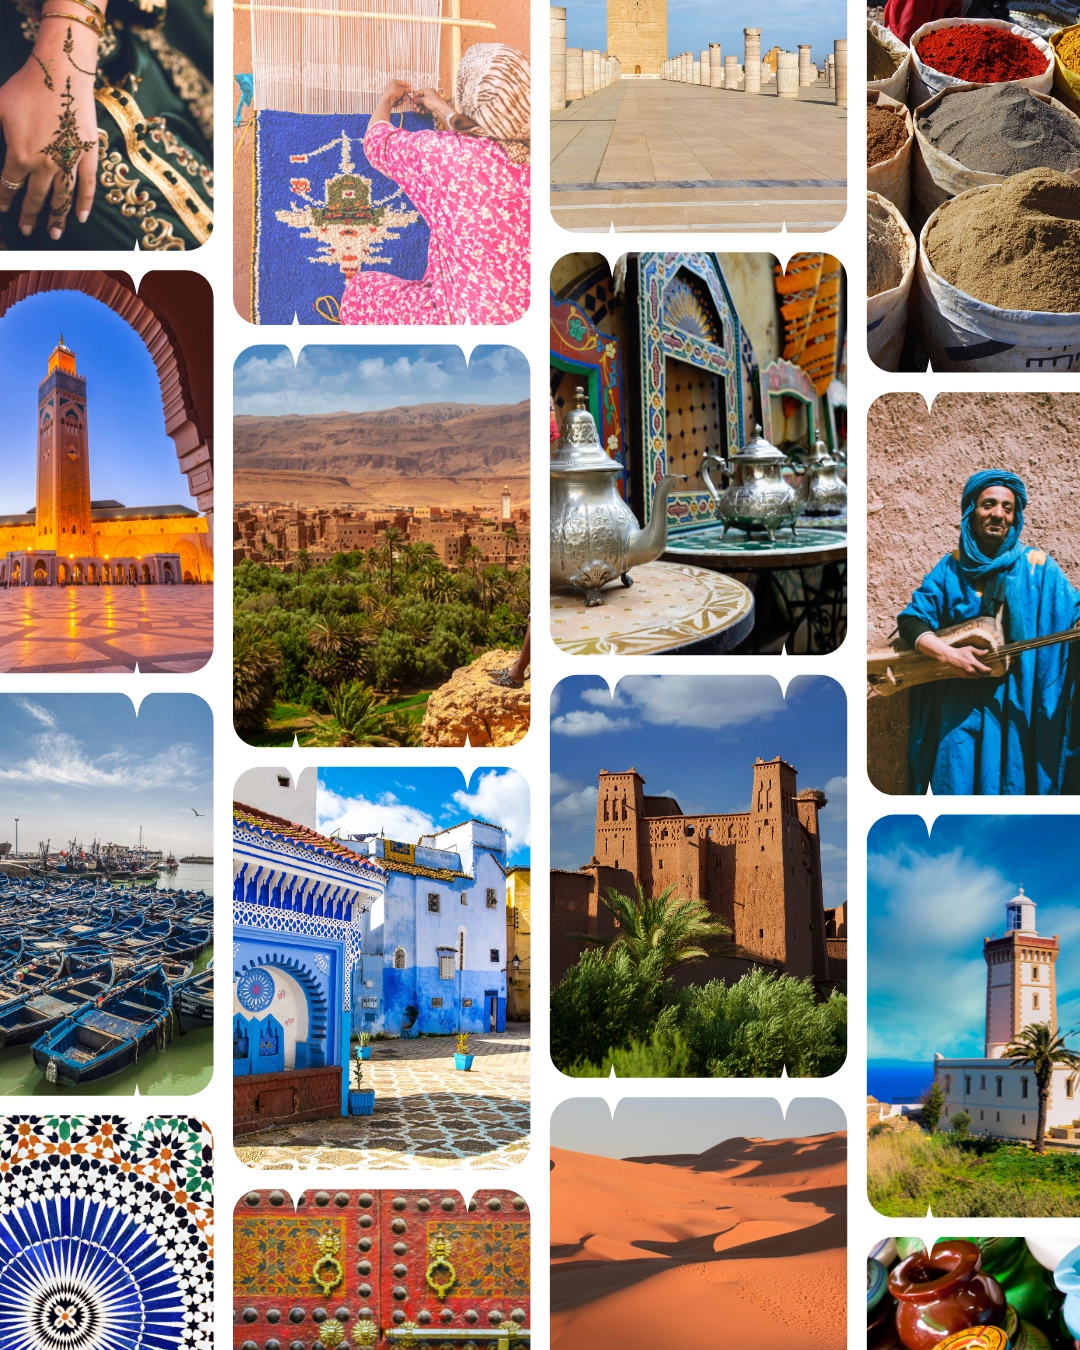 A collection of Moroccan places and cultures.